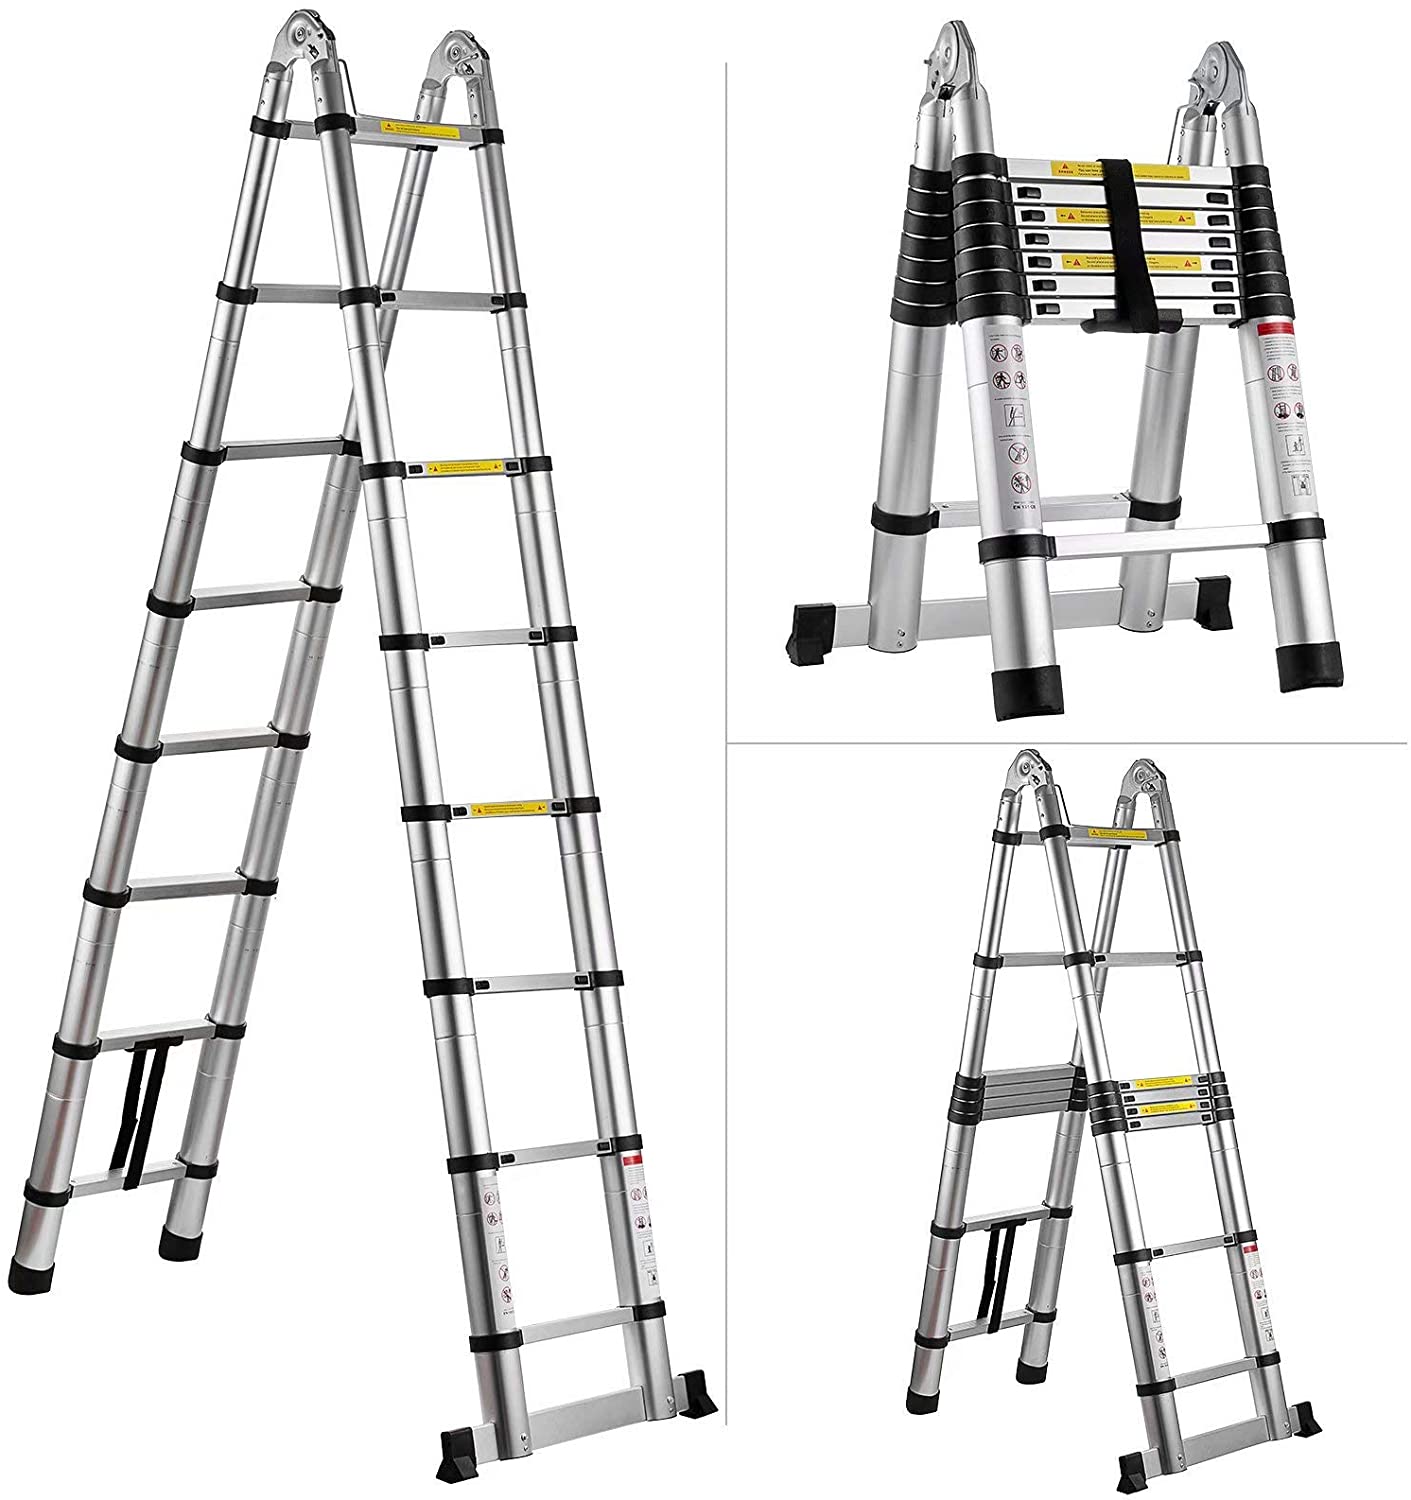 9. HIHONE 16.5 FT Quick Button Retraction Telescopic Extension Ladder